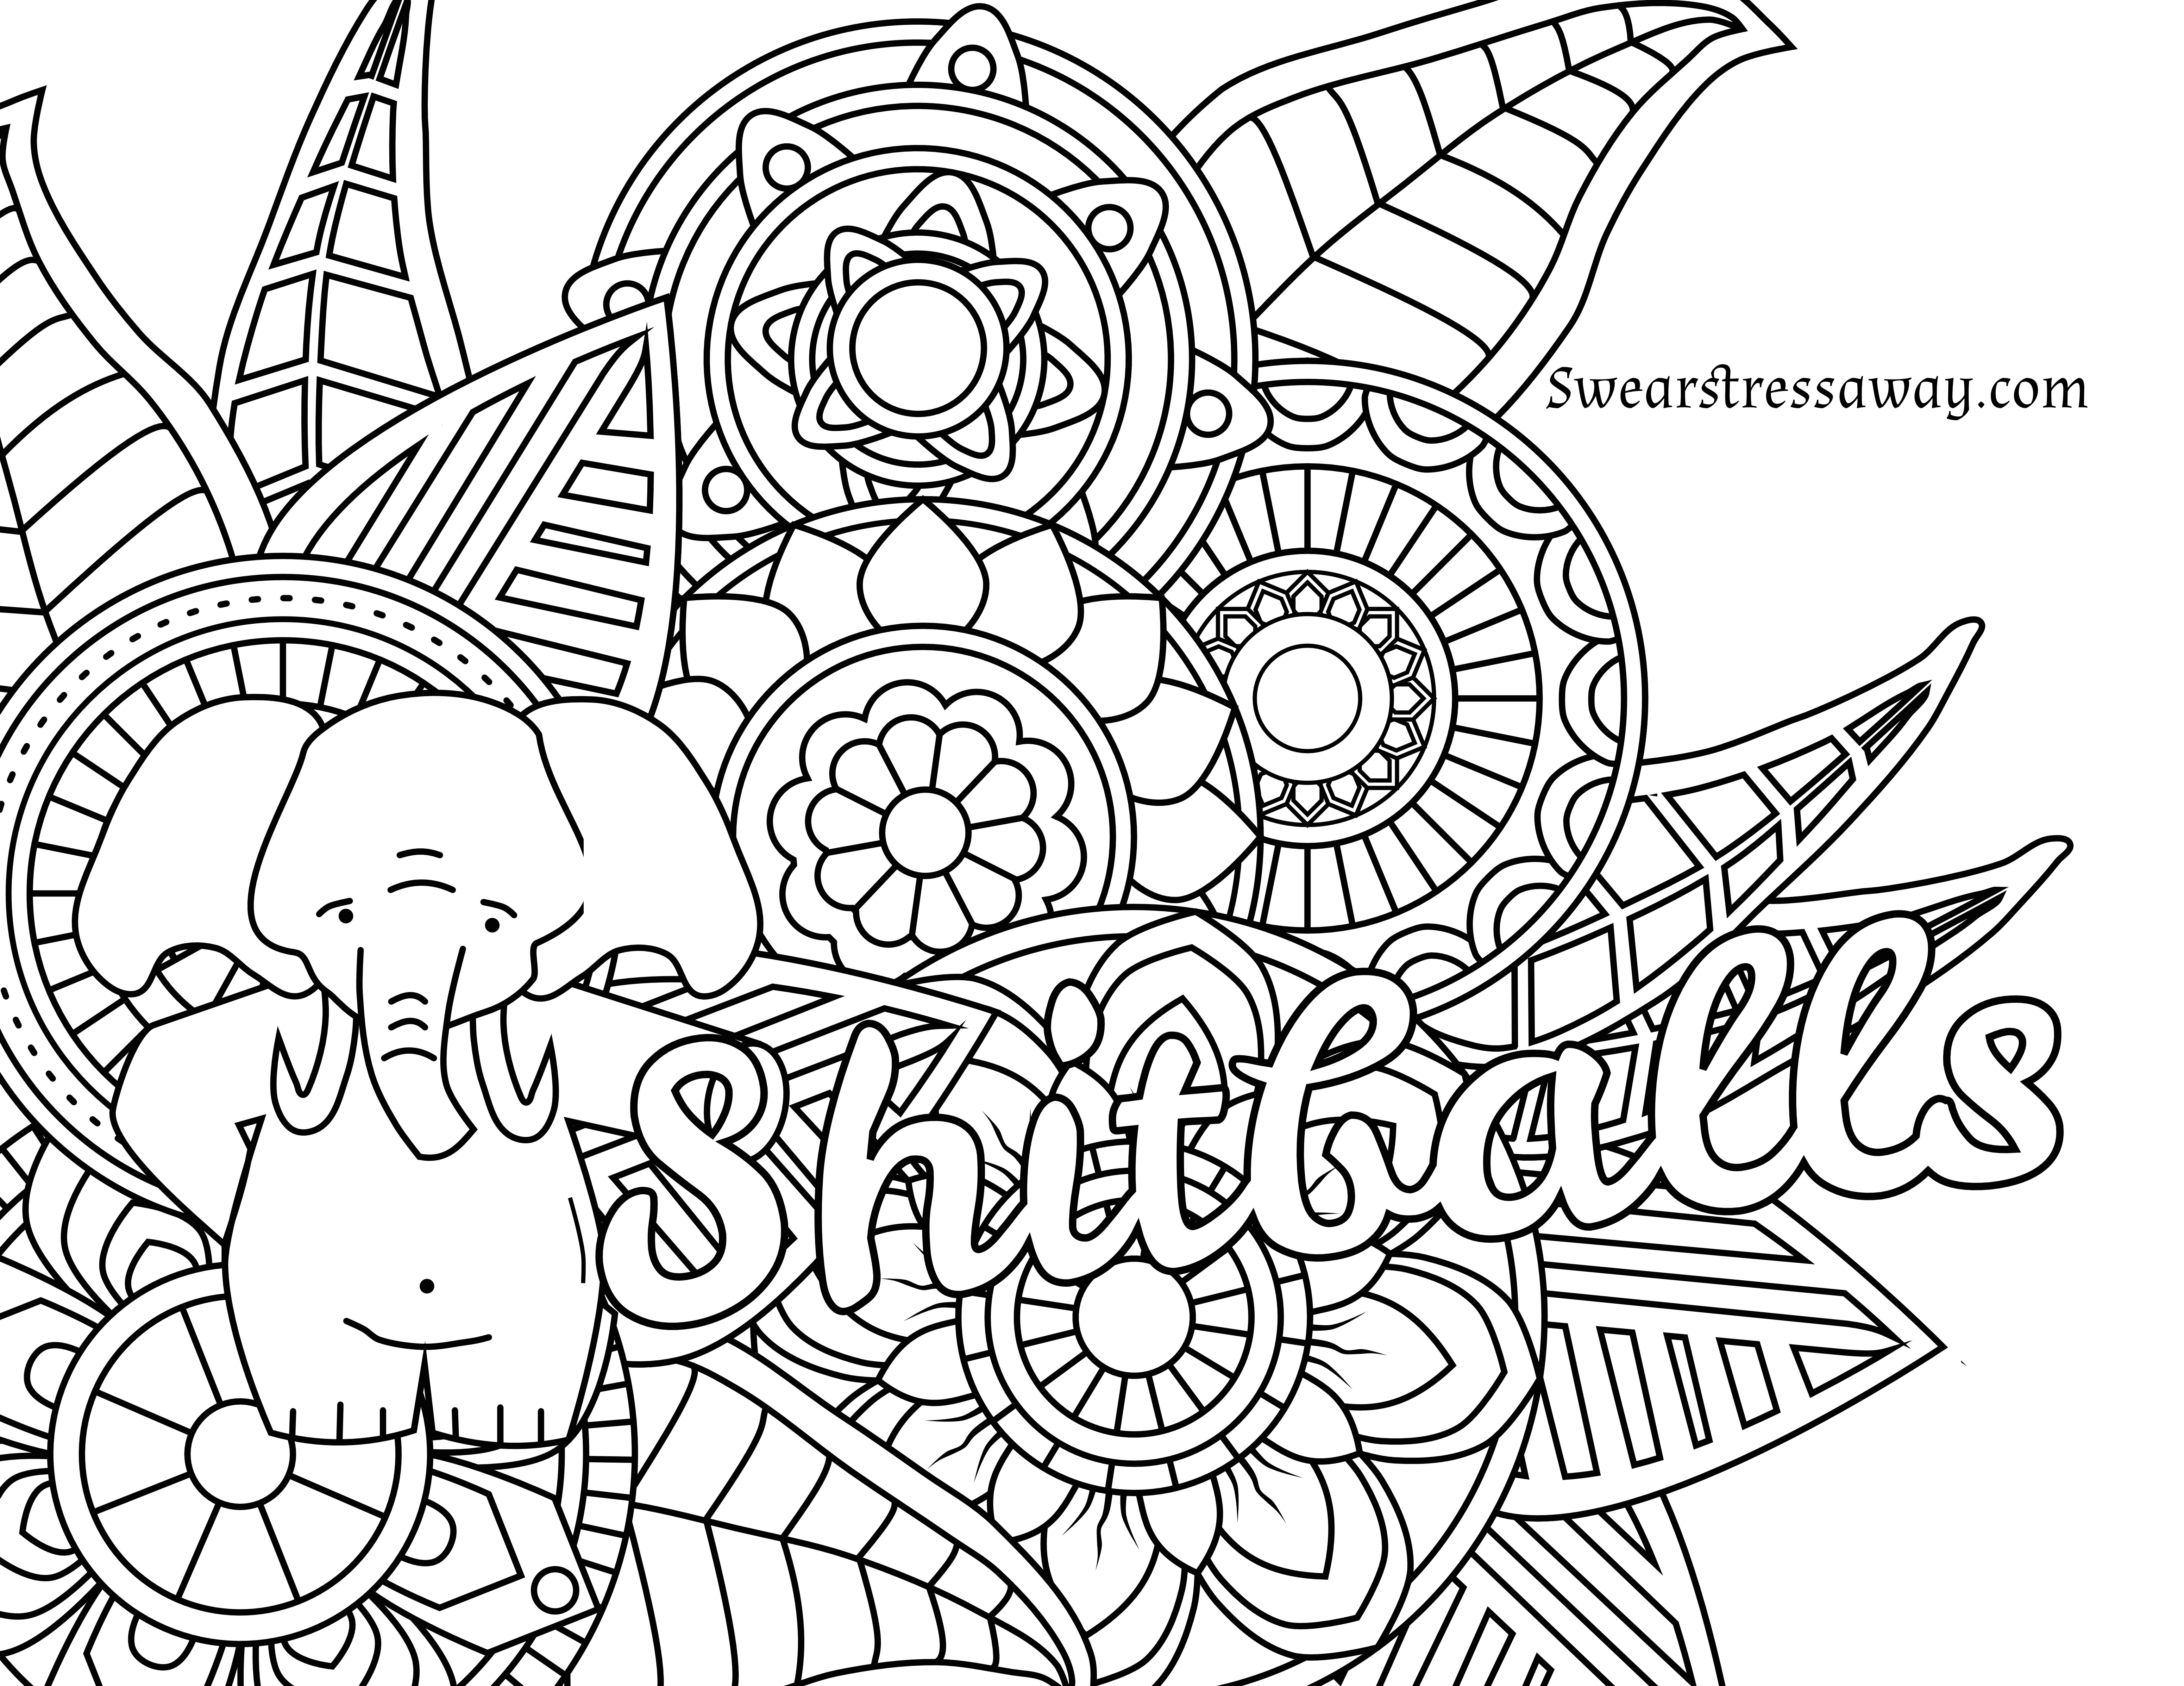 Free Printable Coloring Pages For Adults Only Swear Words – Jvzooreview - Free Printable Coloring Pages For Adults Only Swear Words